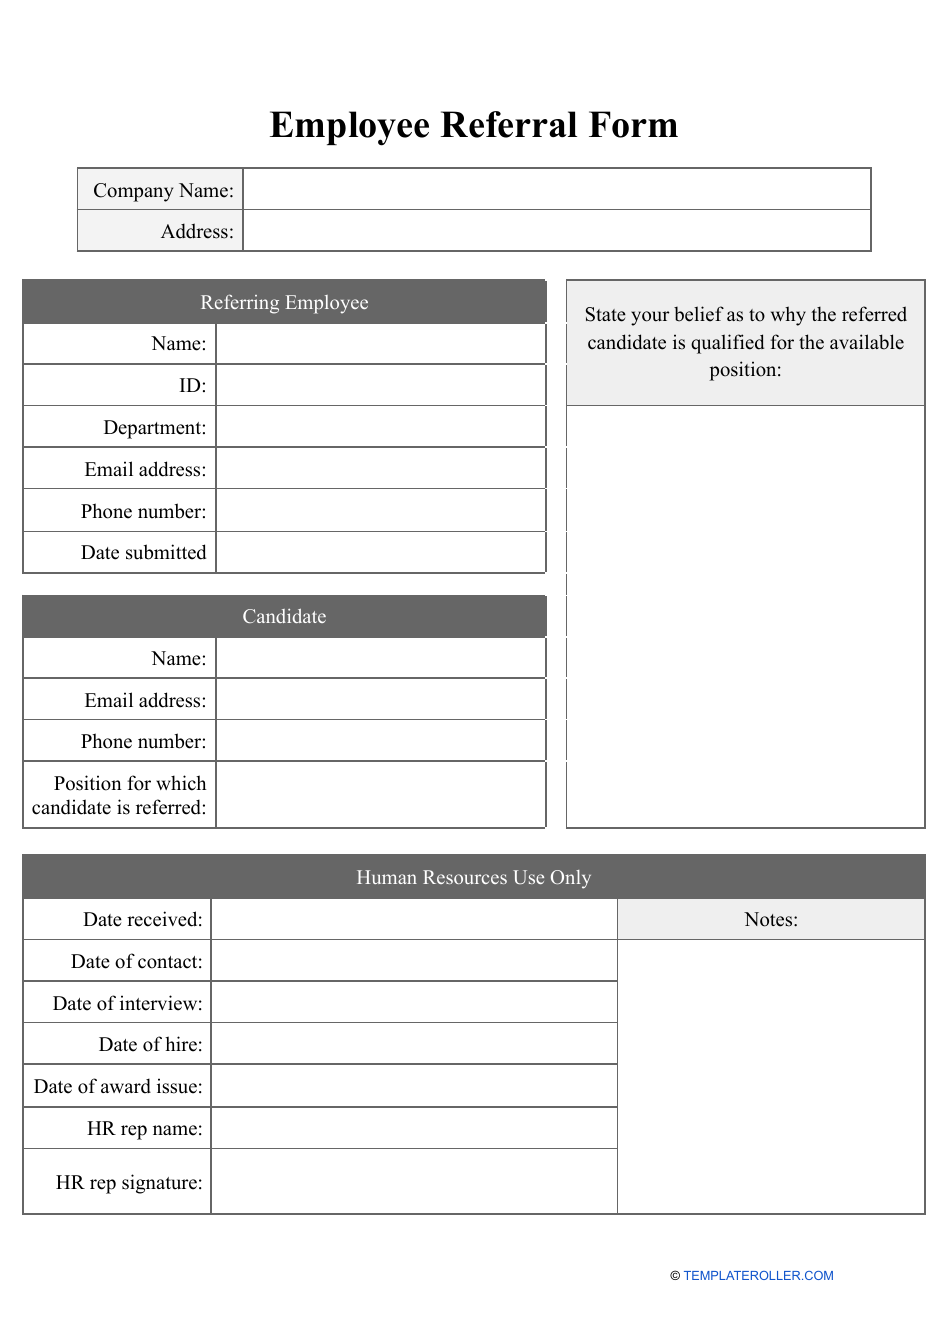 Employee Referral Form, Page 1